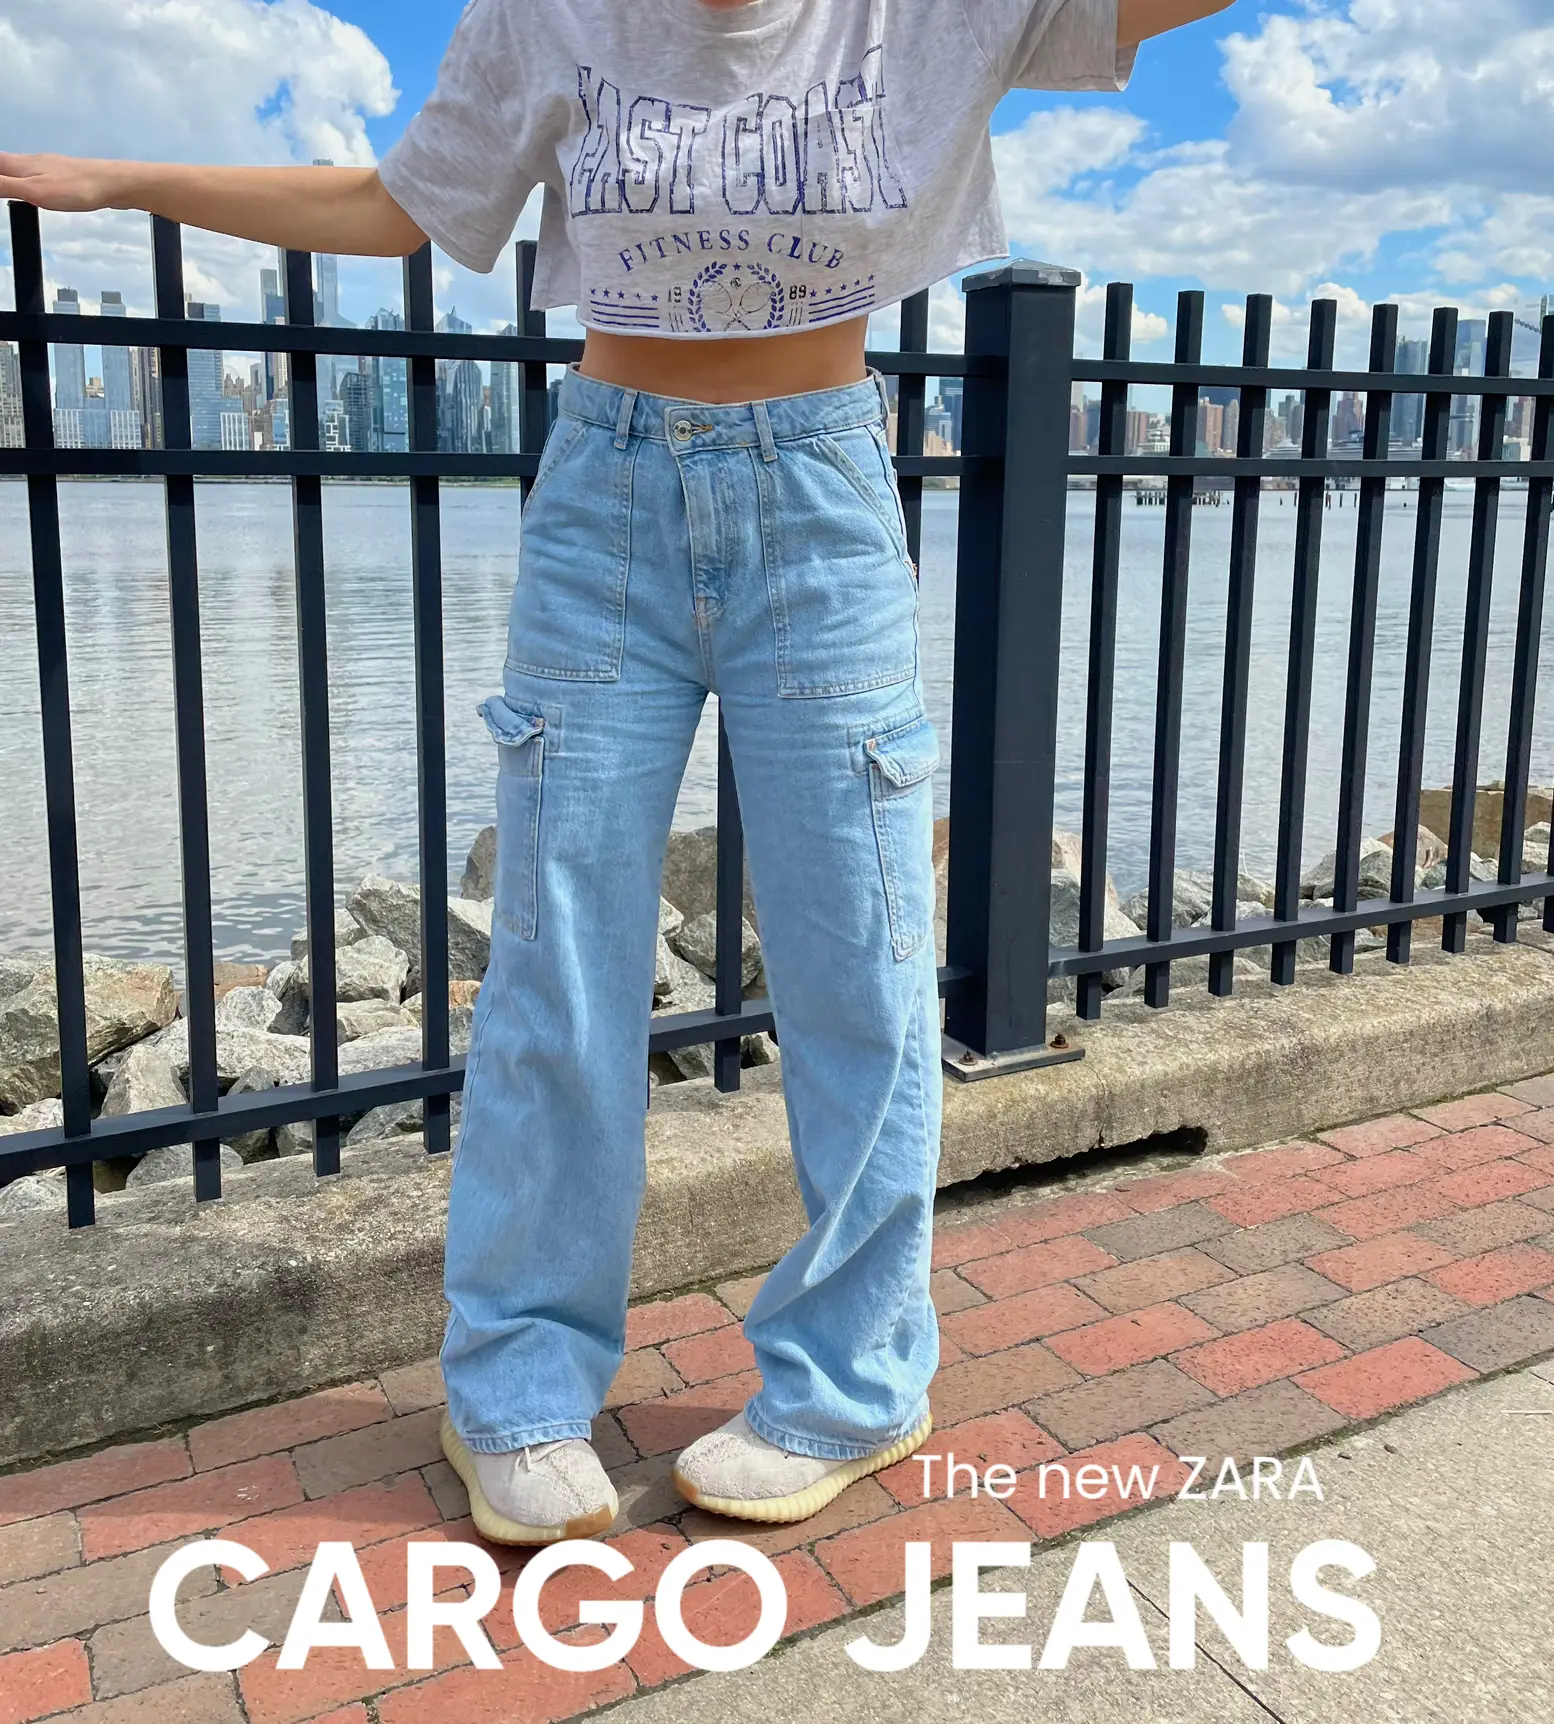 You NEED the new Zara Cargo Jeans 👖, Gallery posted by Nina